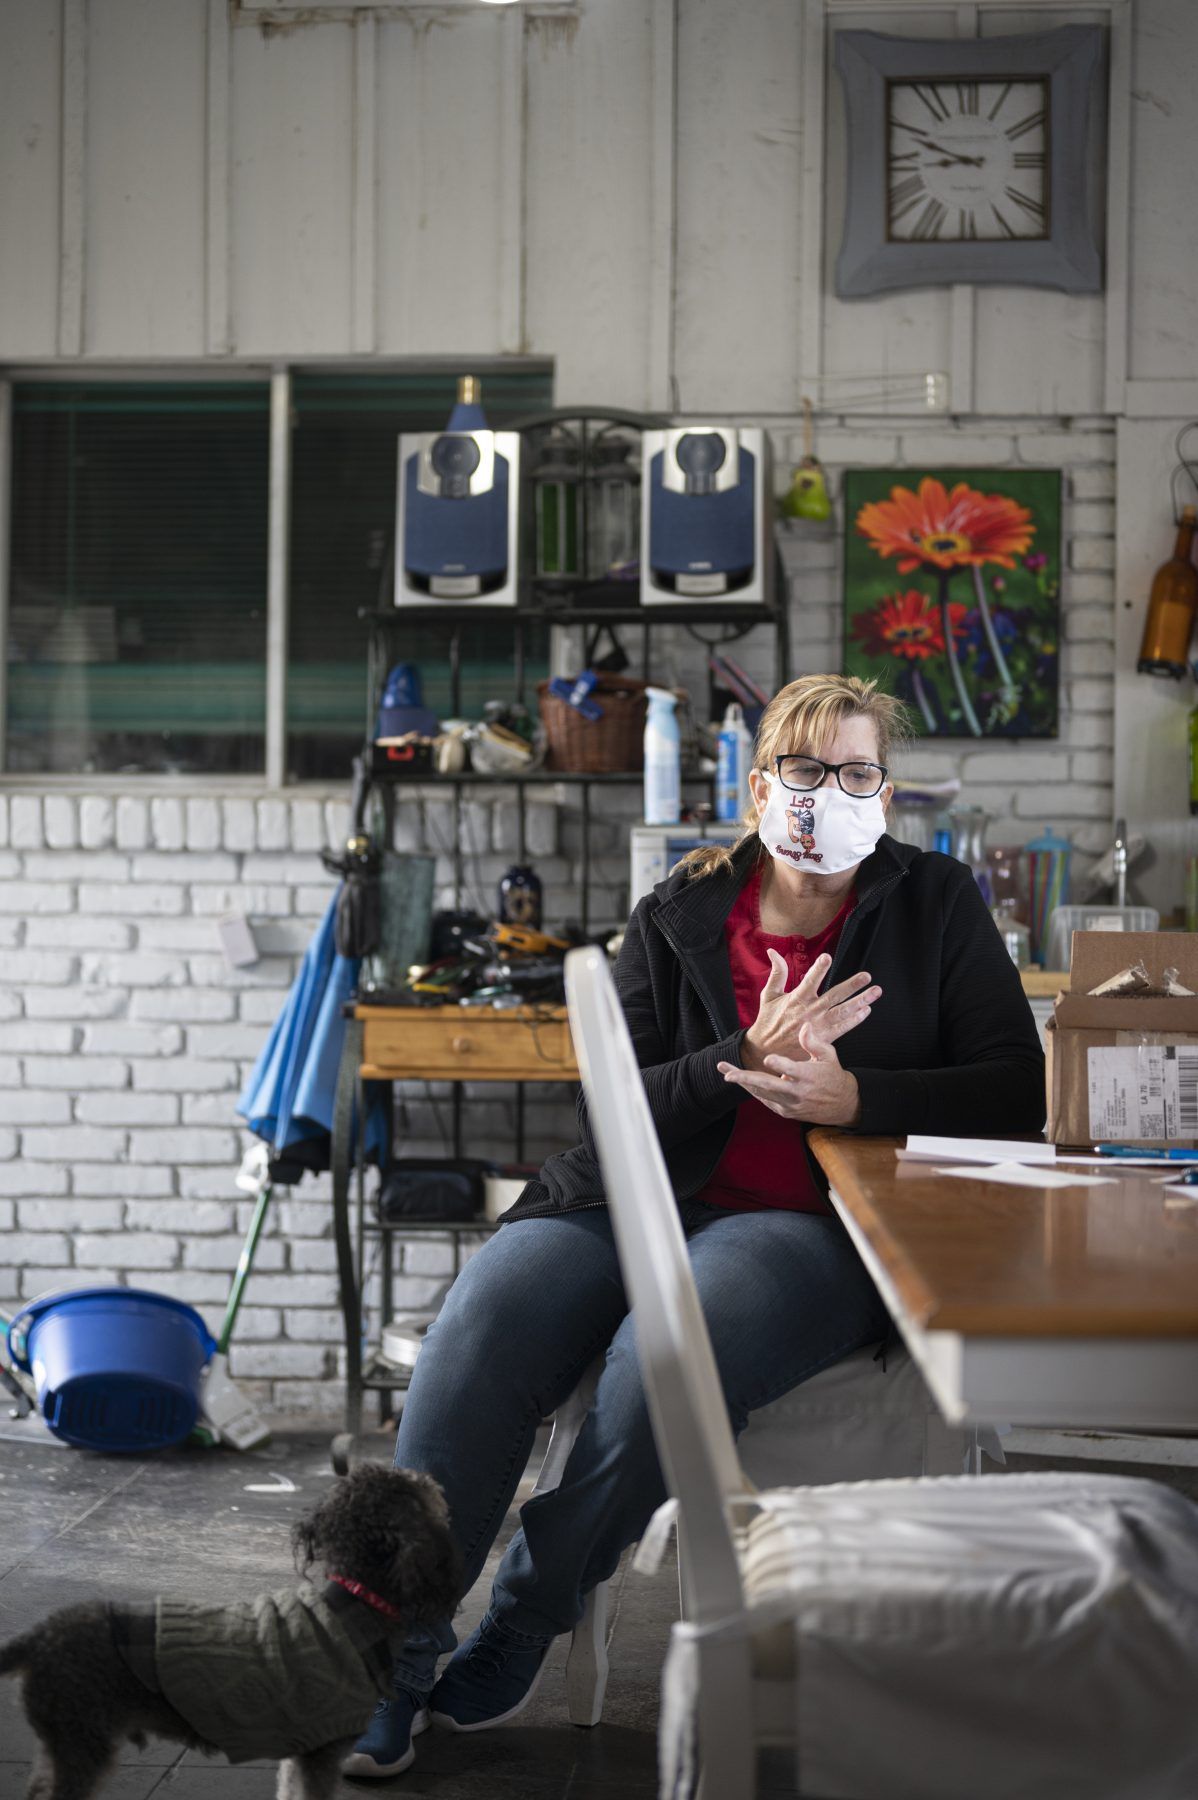 Teri Johnson, president of the Calcasieu Federation of Teachers and School Employees, sits in her temporary office in her home. The teachers’ union office was destroyed by Hurricane Laura. Image by Katie Sikora. United States, 2020.
